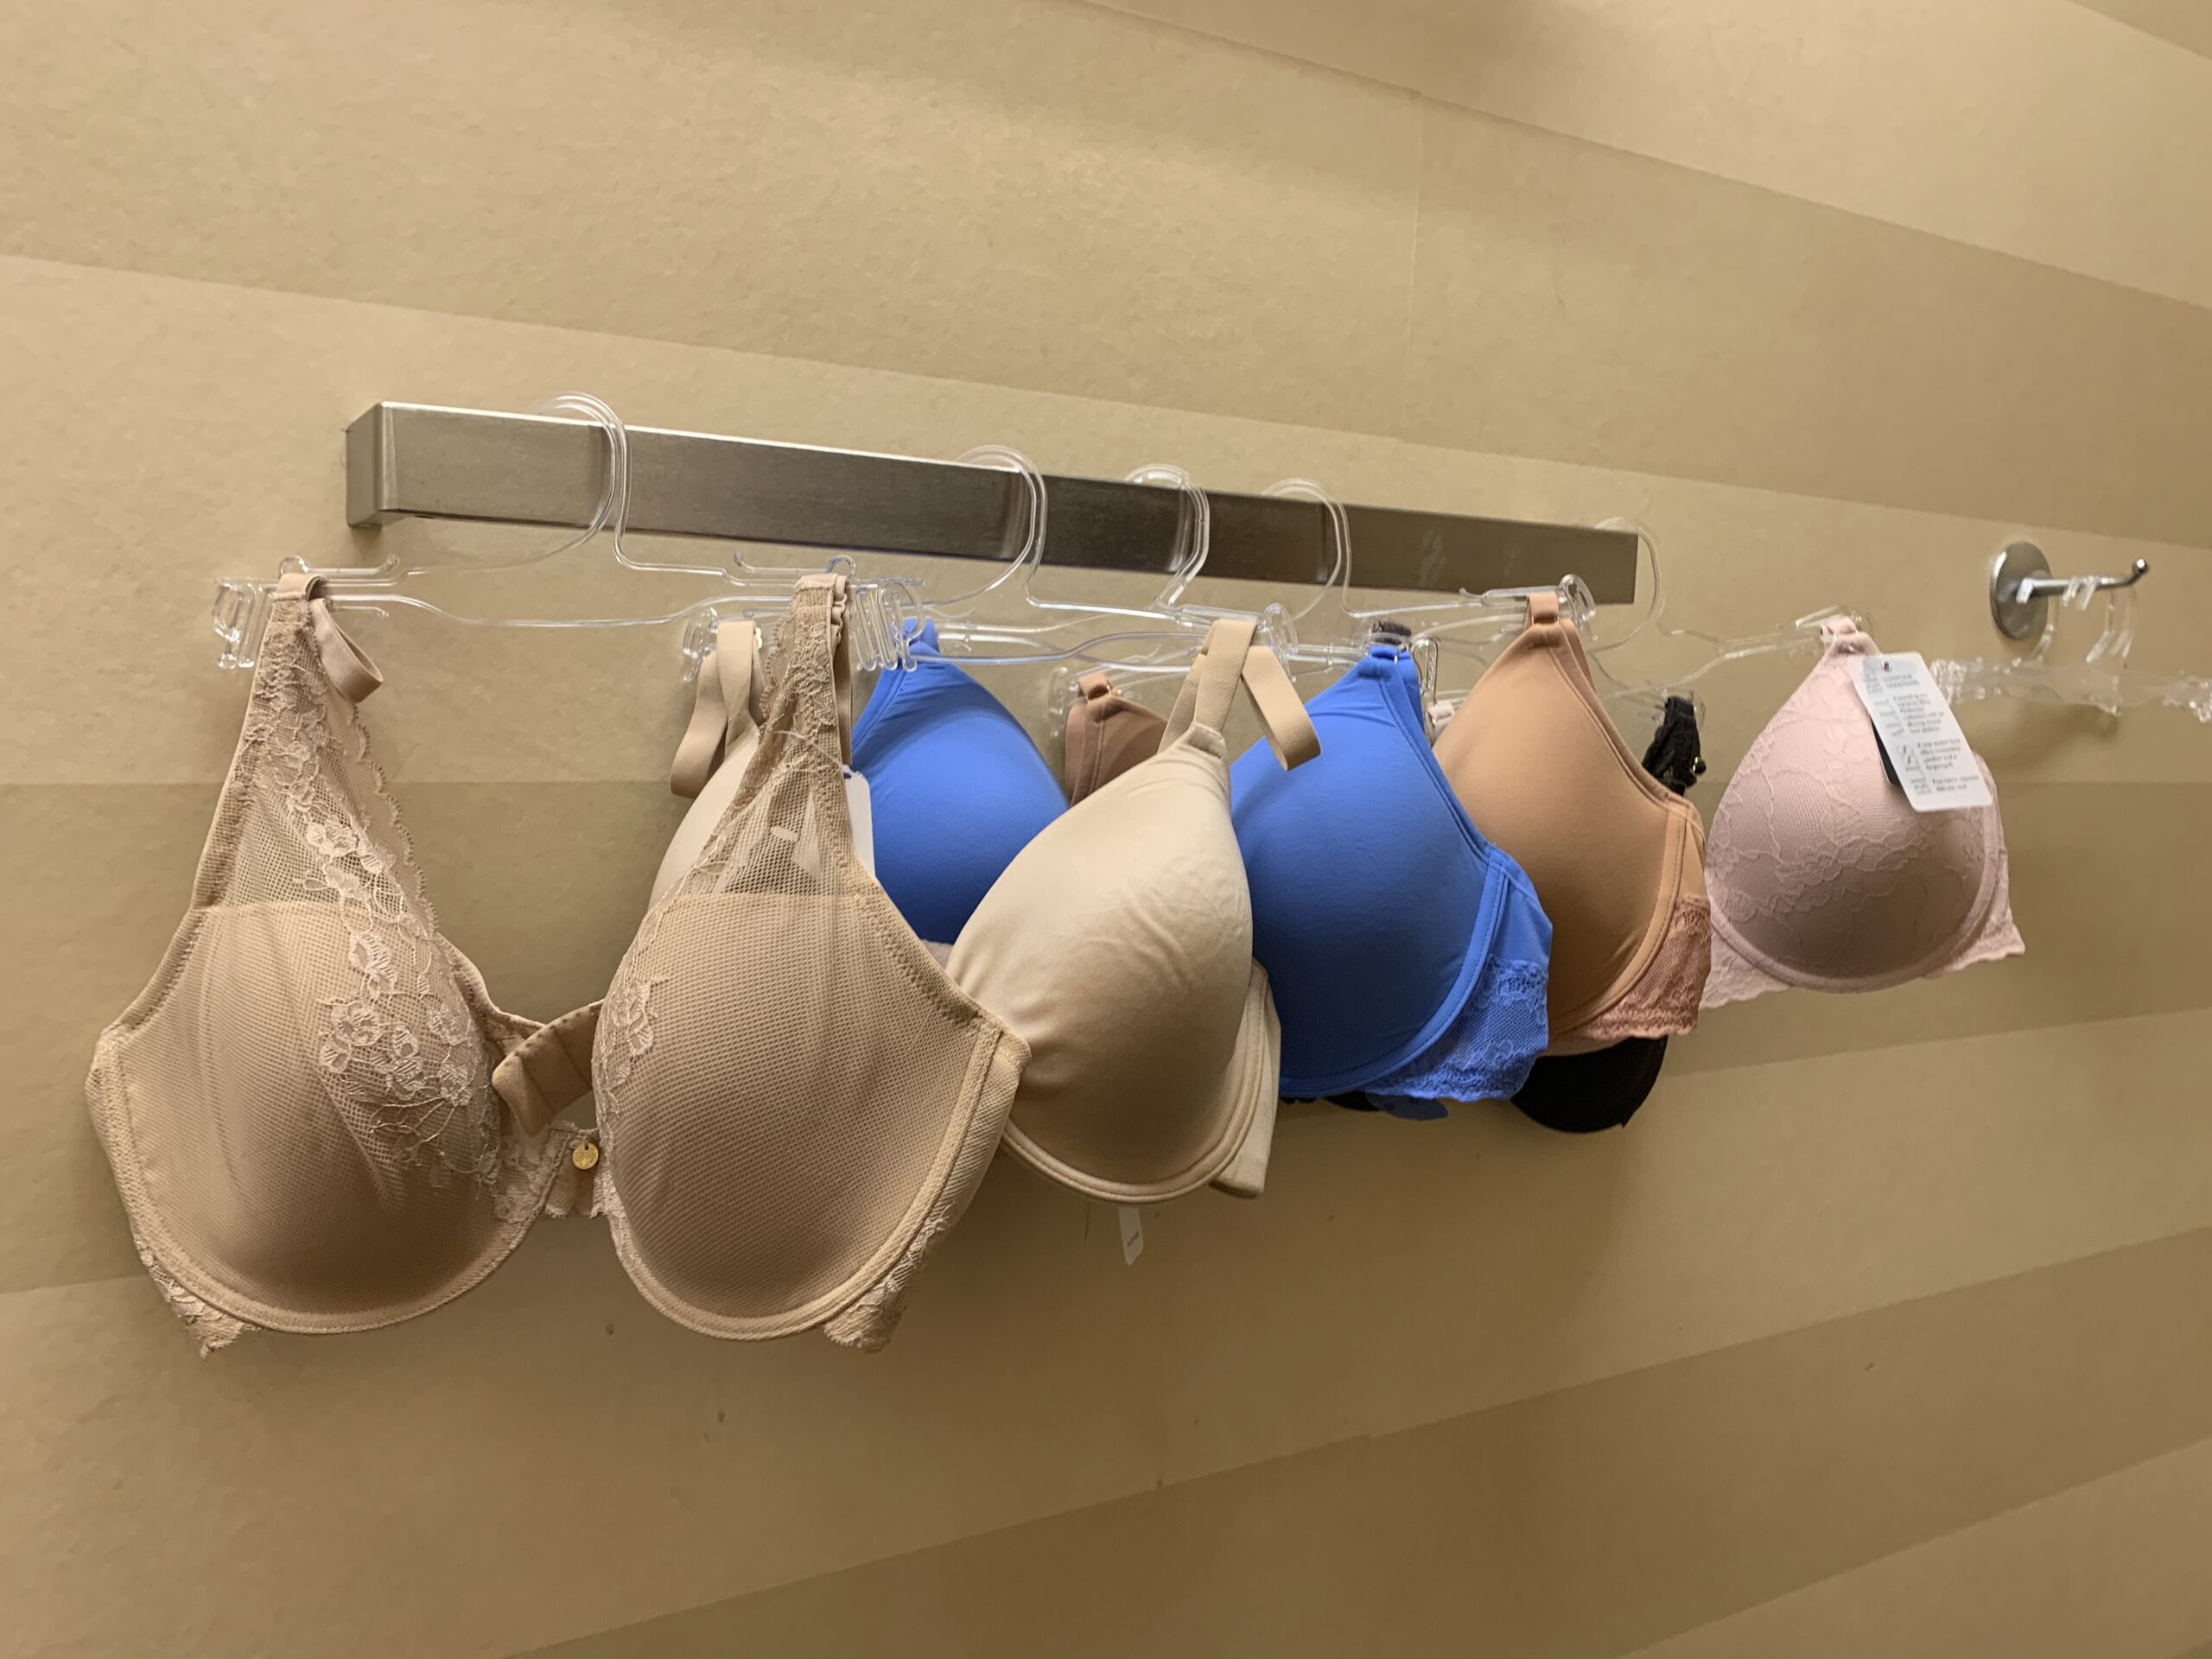 Find Your Best Bra Fit at the TAB Fitting Clinic in Elora August 22